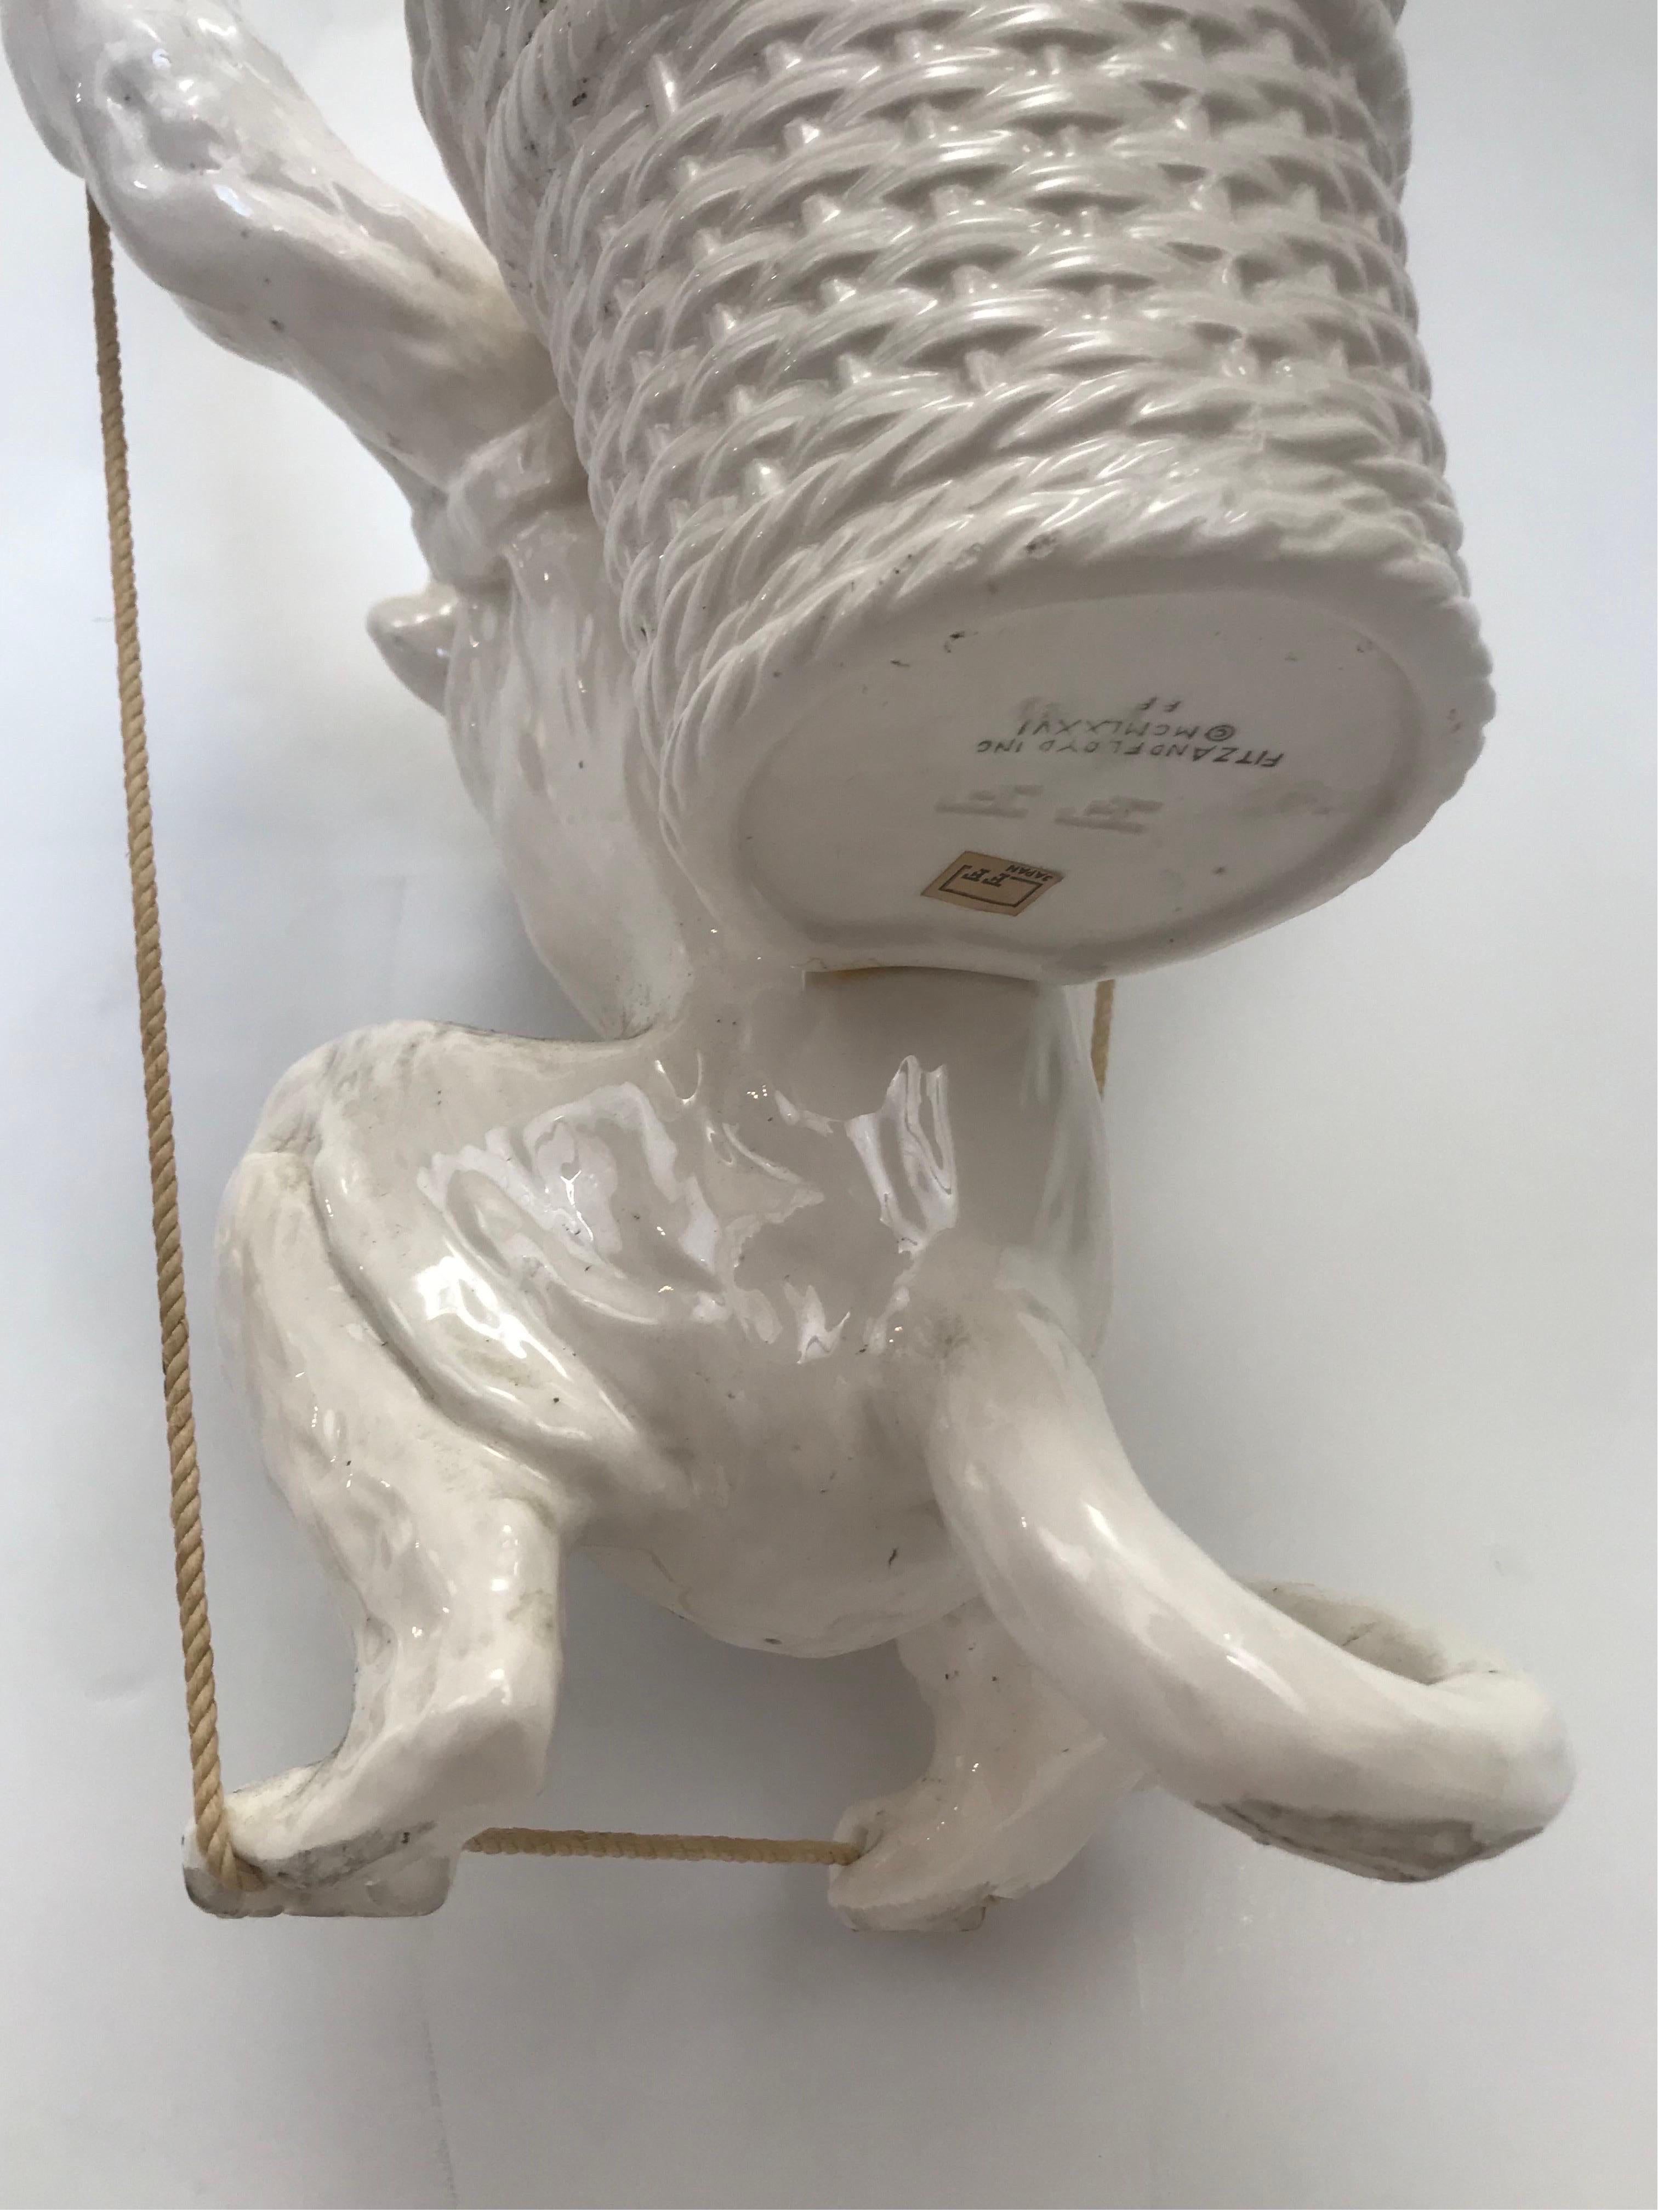 Hanging Ceramic Monkey Planter by Fits and Floyd, 1976 For Sale 1